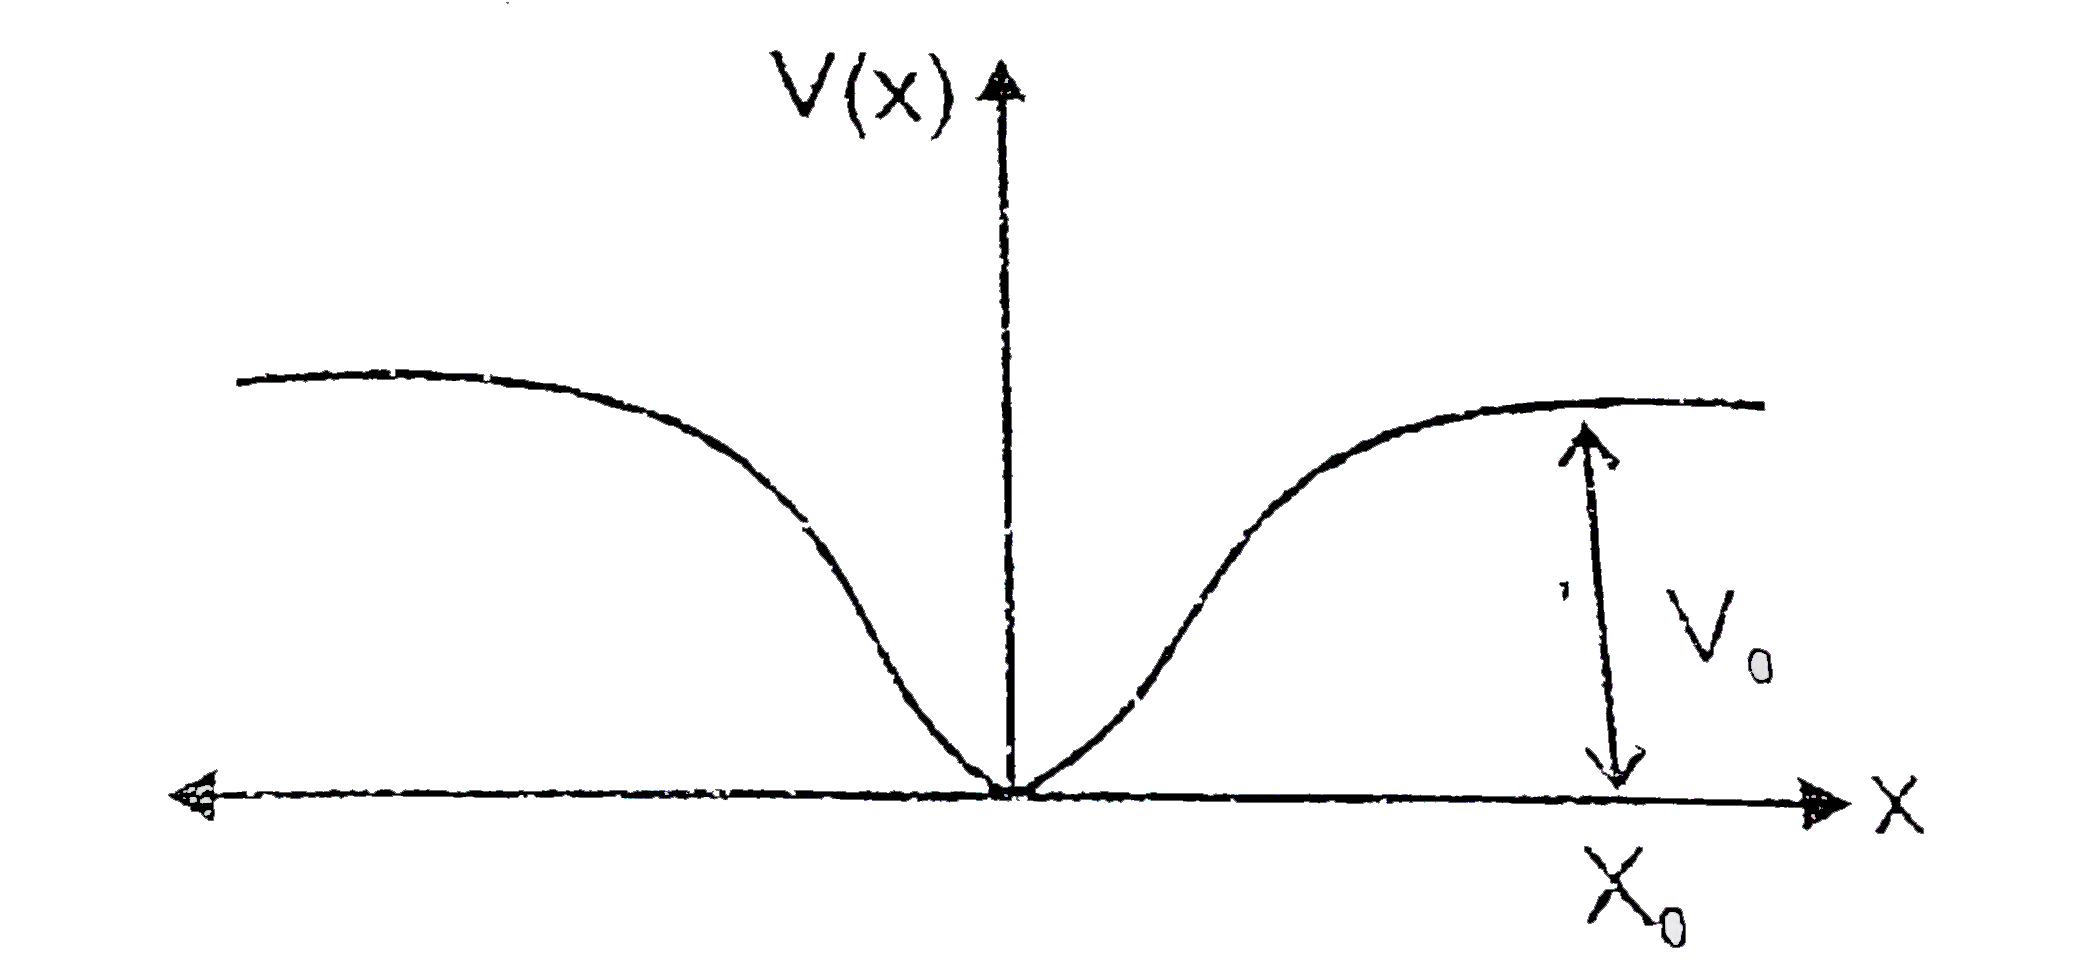 When a particle is mass m moves on the x- axis in a potential of the from V(x) = kx^(2), it performs simple harmonic motion. The corresponding thime periond is proportional to sqrt((m)/(k)), as can be seen easily asing dimensional analysis. However, the motion of a pariticle can be periodic even when its potential enem increases on both sides x = 0 in a way different from kx^(2) and its total energy is such that the particel does not escape to infinity. consider a particle of mass m moving onthe x-axis . Its potential energy is V(x) = omega (alpha gt 0) for |x| near the origin and becomes a constant equal to V(0) for |x| ge X(0) (see figure)      If the total energy of the particle is E, it will perform is periodic motion why if :